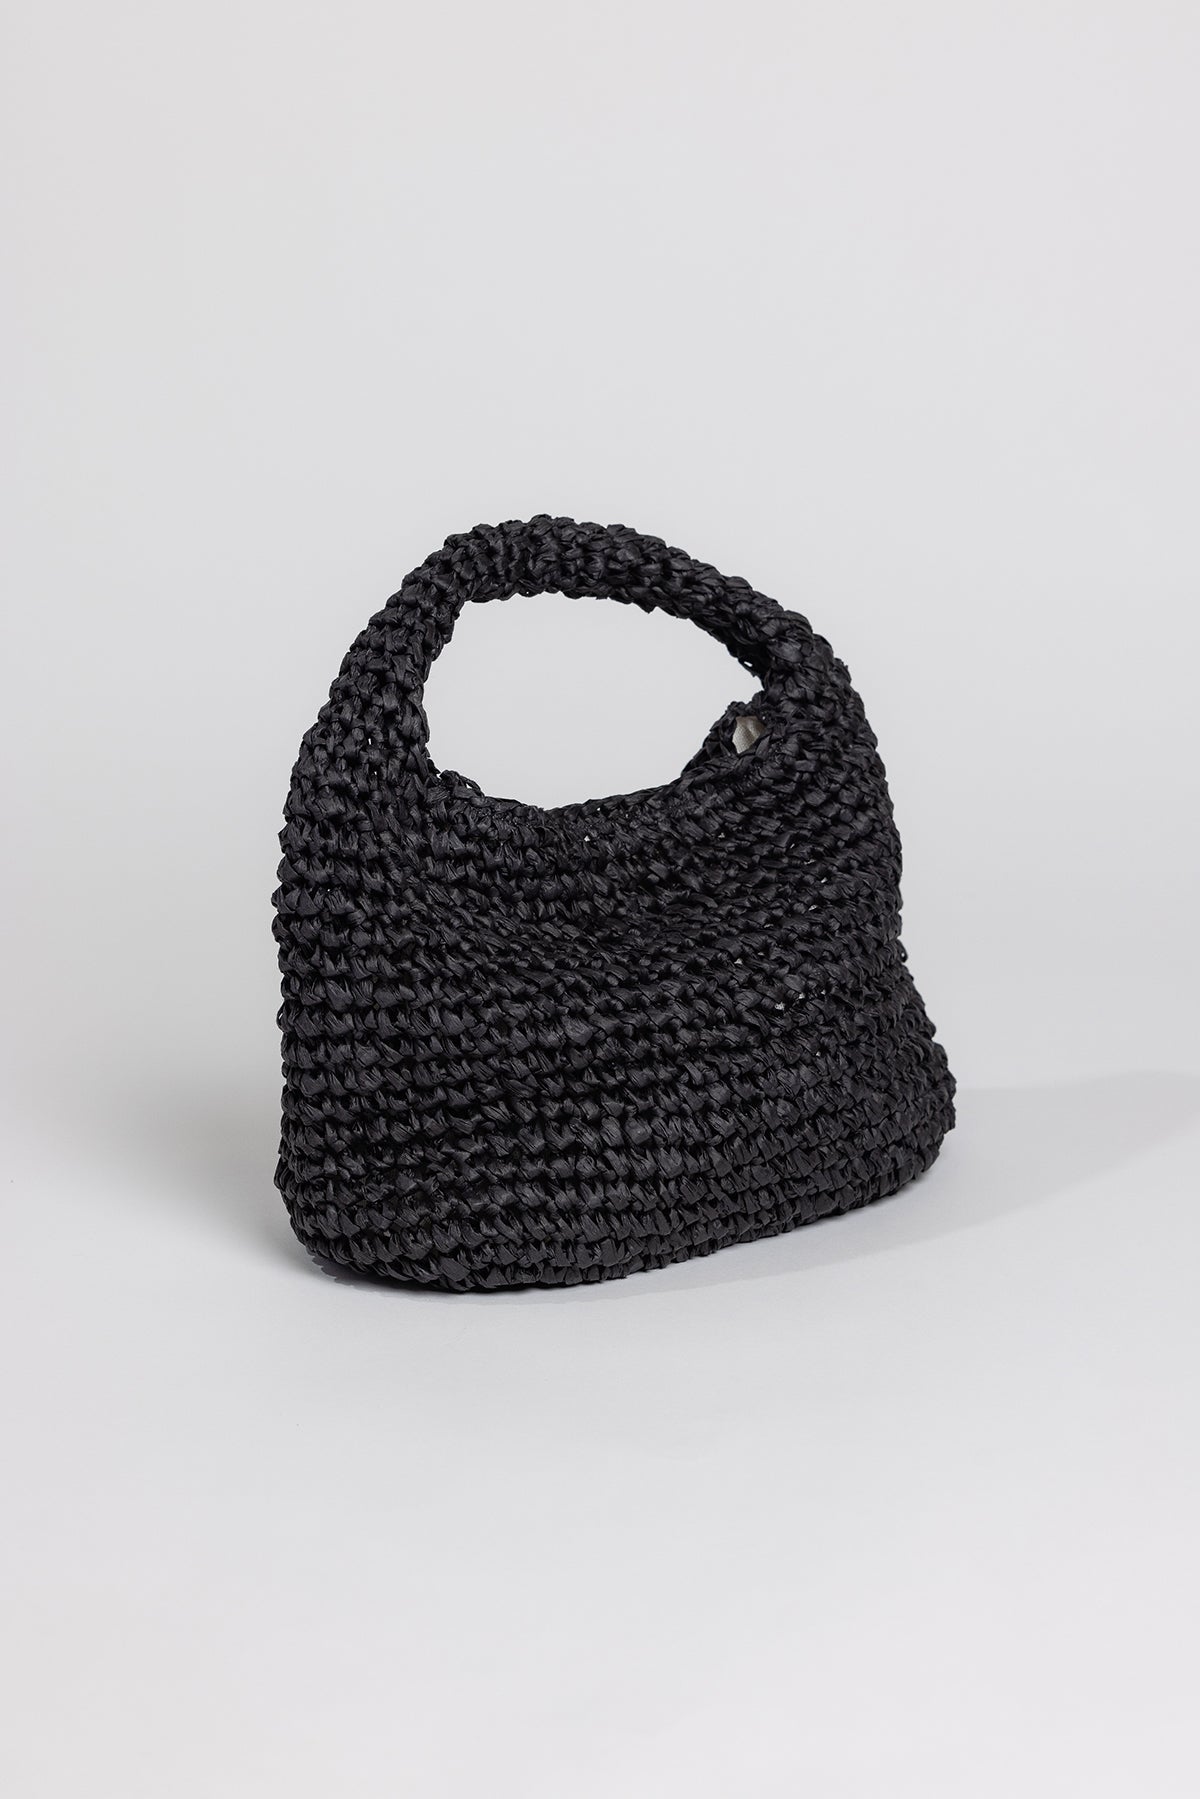 Sentence with replacement: Black crocheted Velvet by Graham & Spencer SLOUCH BAG with a wrist loop, shown against a plain white background.-26166343958721